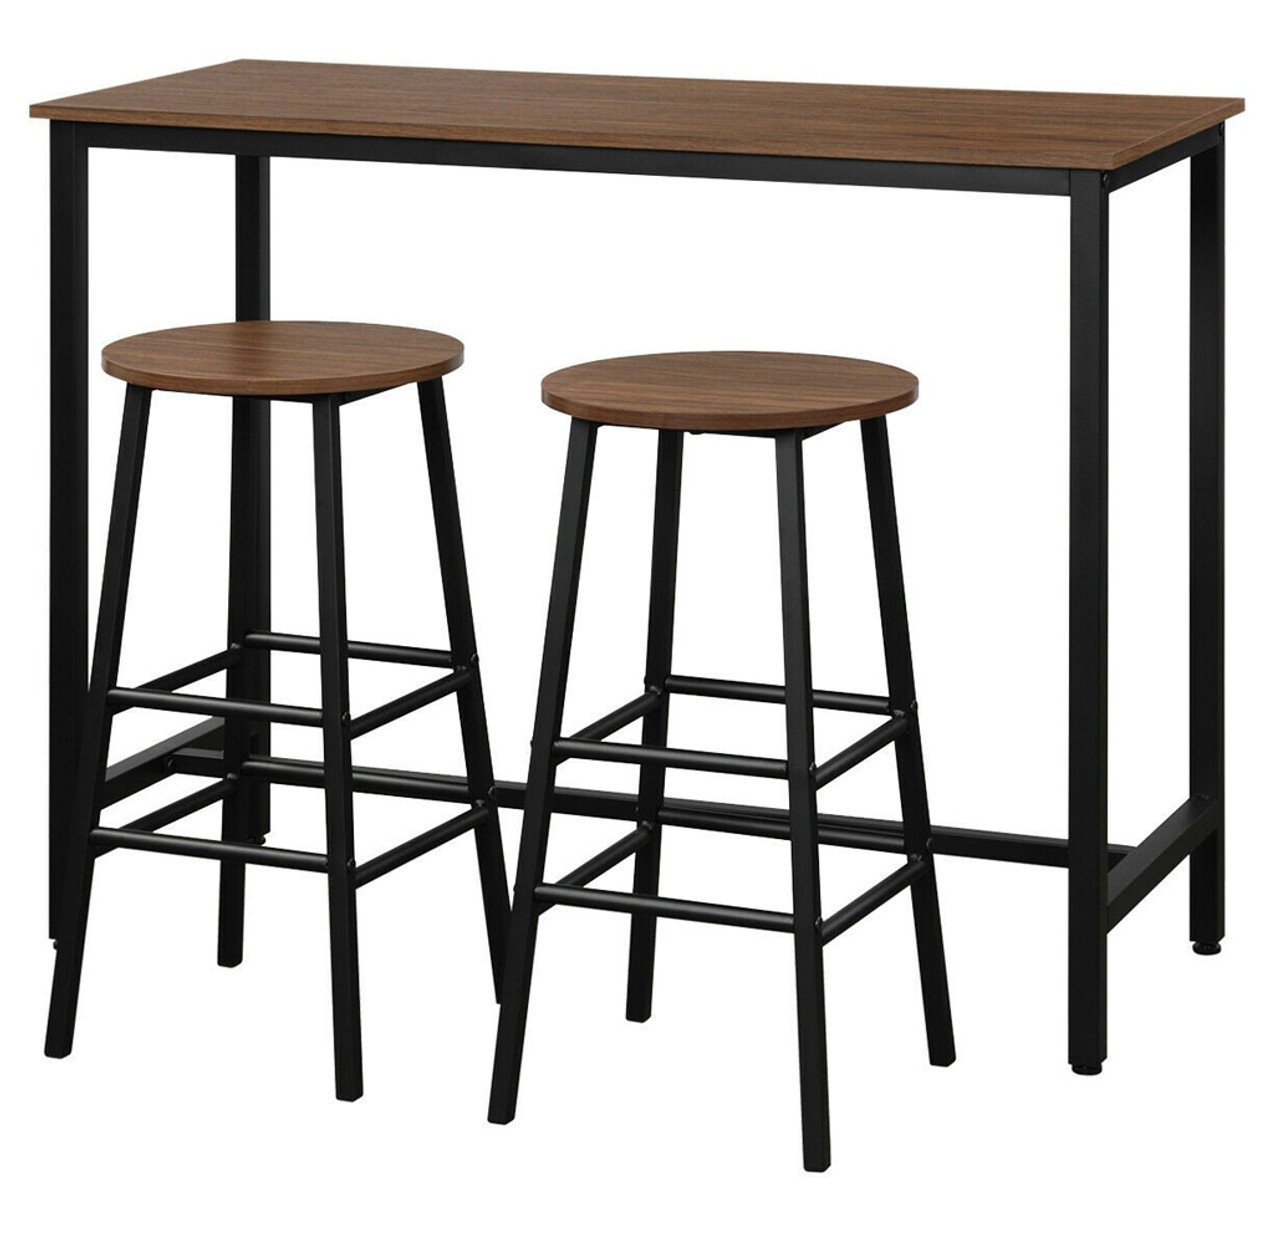 Counter Height 3-Piece Pub Table Dining Set product image